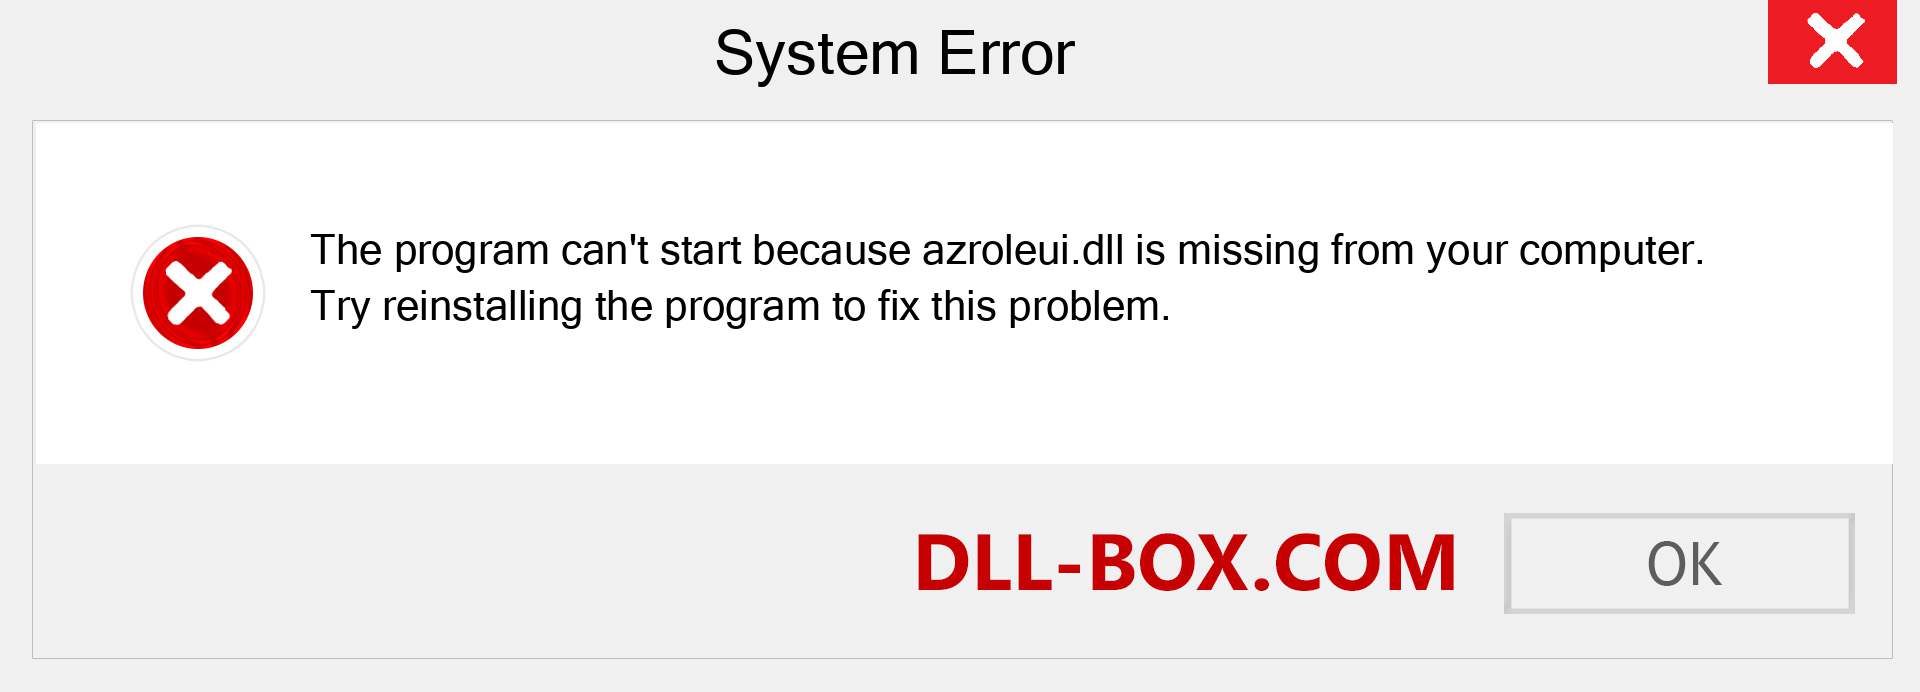  azroleui.dll file is missing?. Download for Windows 7, 8, 10 - Fix  azroleui dll Missing Error on Windows, photos, images